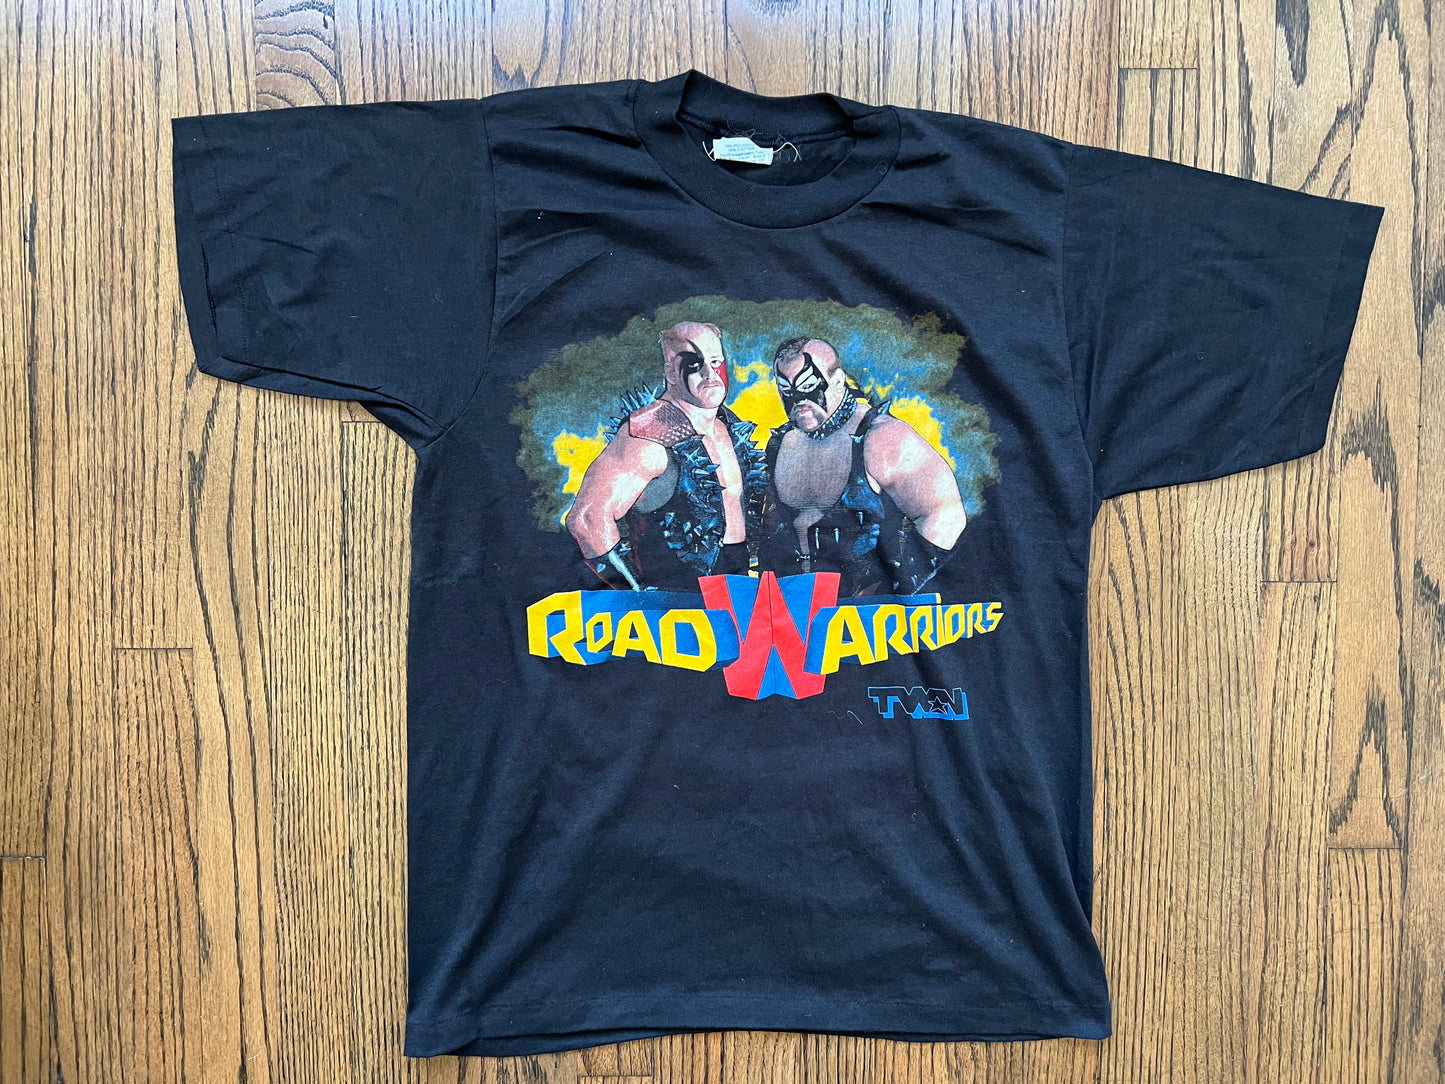 1987 NWA JCP Road Warriors shirt featuring Hawk and Animal